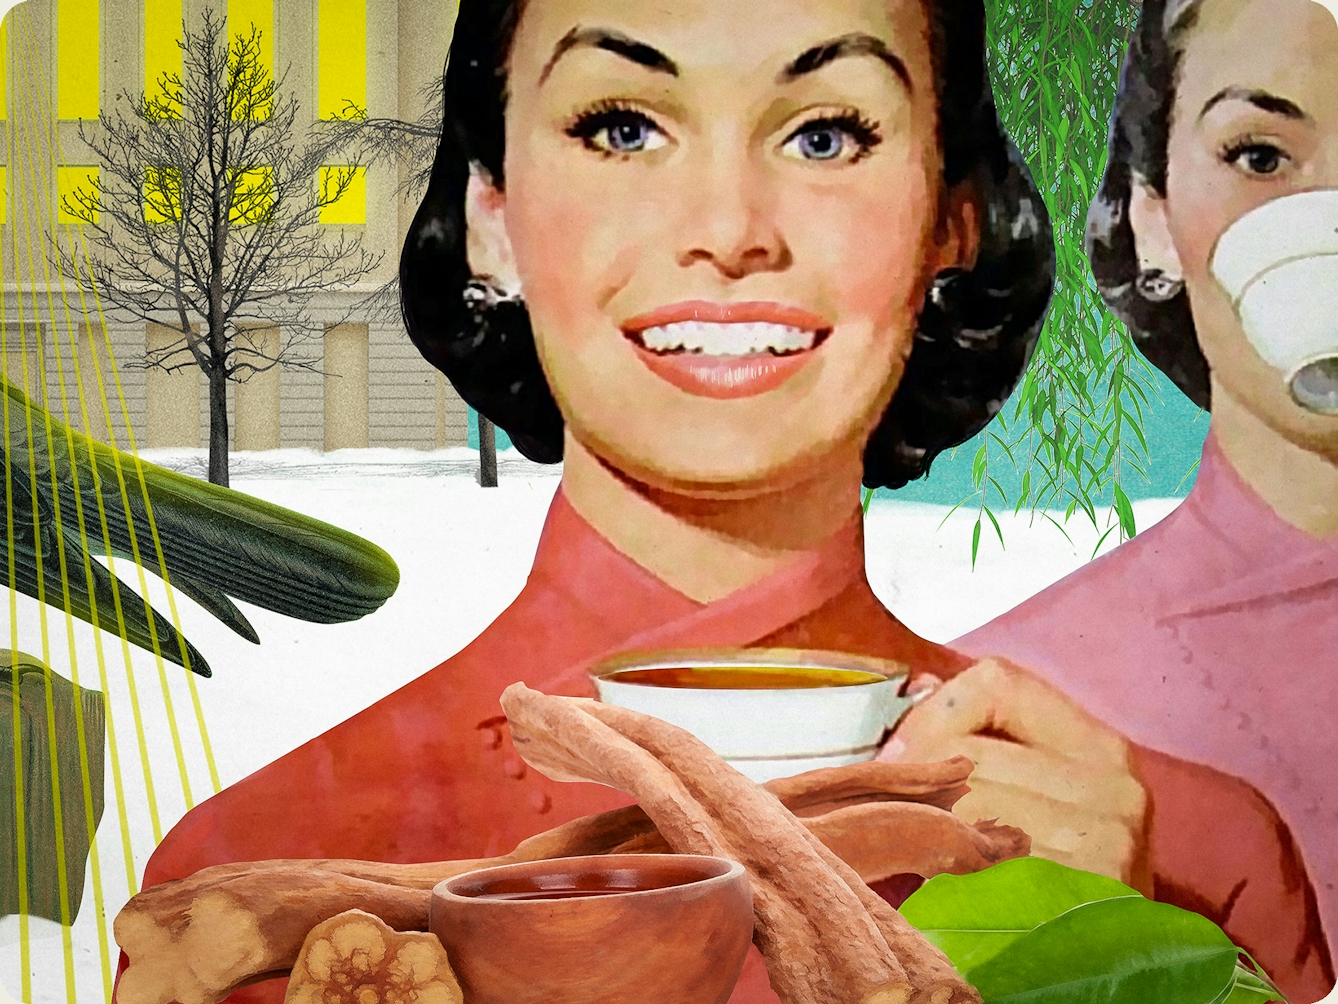 Detail from a larger mixed media digital artwork combining found imagery from vintage magazines and books with painted and textured elements. The overall hues are greens, yellows and pinks. At the centre of the artwork is a woman with short black hair wearing a red/pink Kimono. She is pictured from the shoulders up. In her left raised hand is a white china teacup. She is smiling broadly, looking straight at the viewer. In front of her are brown sticks of the ayahuasca plant and several green leaves. Behind the woman in the background to the right is a large tree in full green leaf. To the right, the same woman is repeated several times. In the first duplication she is slightly paler in tone and the teacup is raised to her lips. To the left of the woman in the centre of the image is a snowy scene surrounding a large industrial building. The lights inside the building are bright yellow with fans of laser lights shining out of the windows towards the viewer.